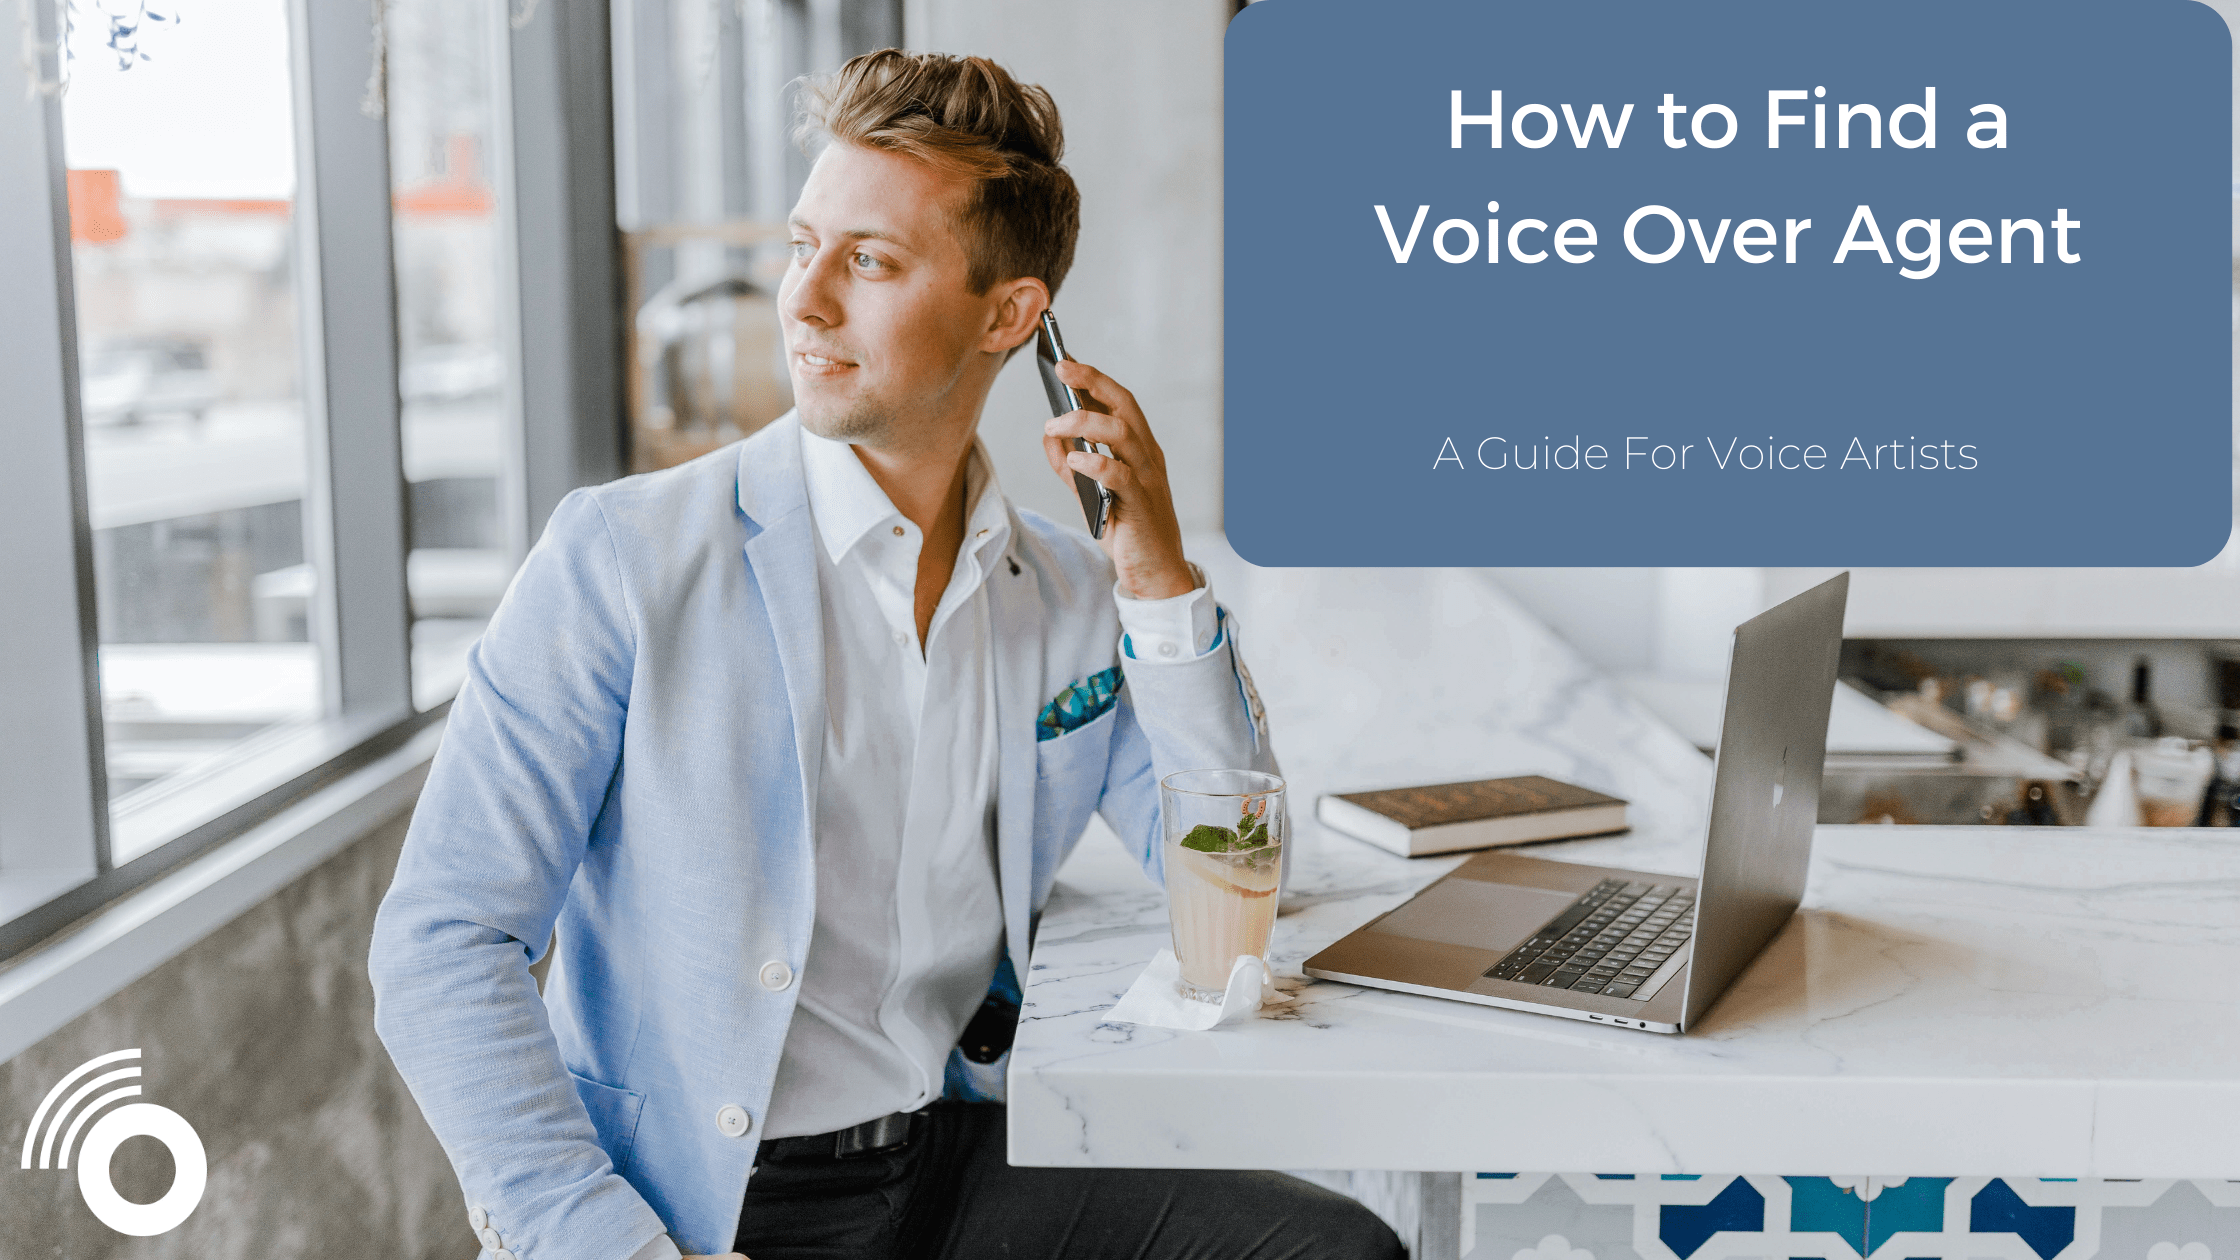 How to Find a Voice Over Agent